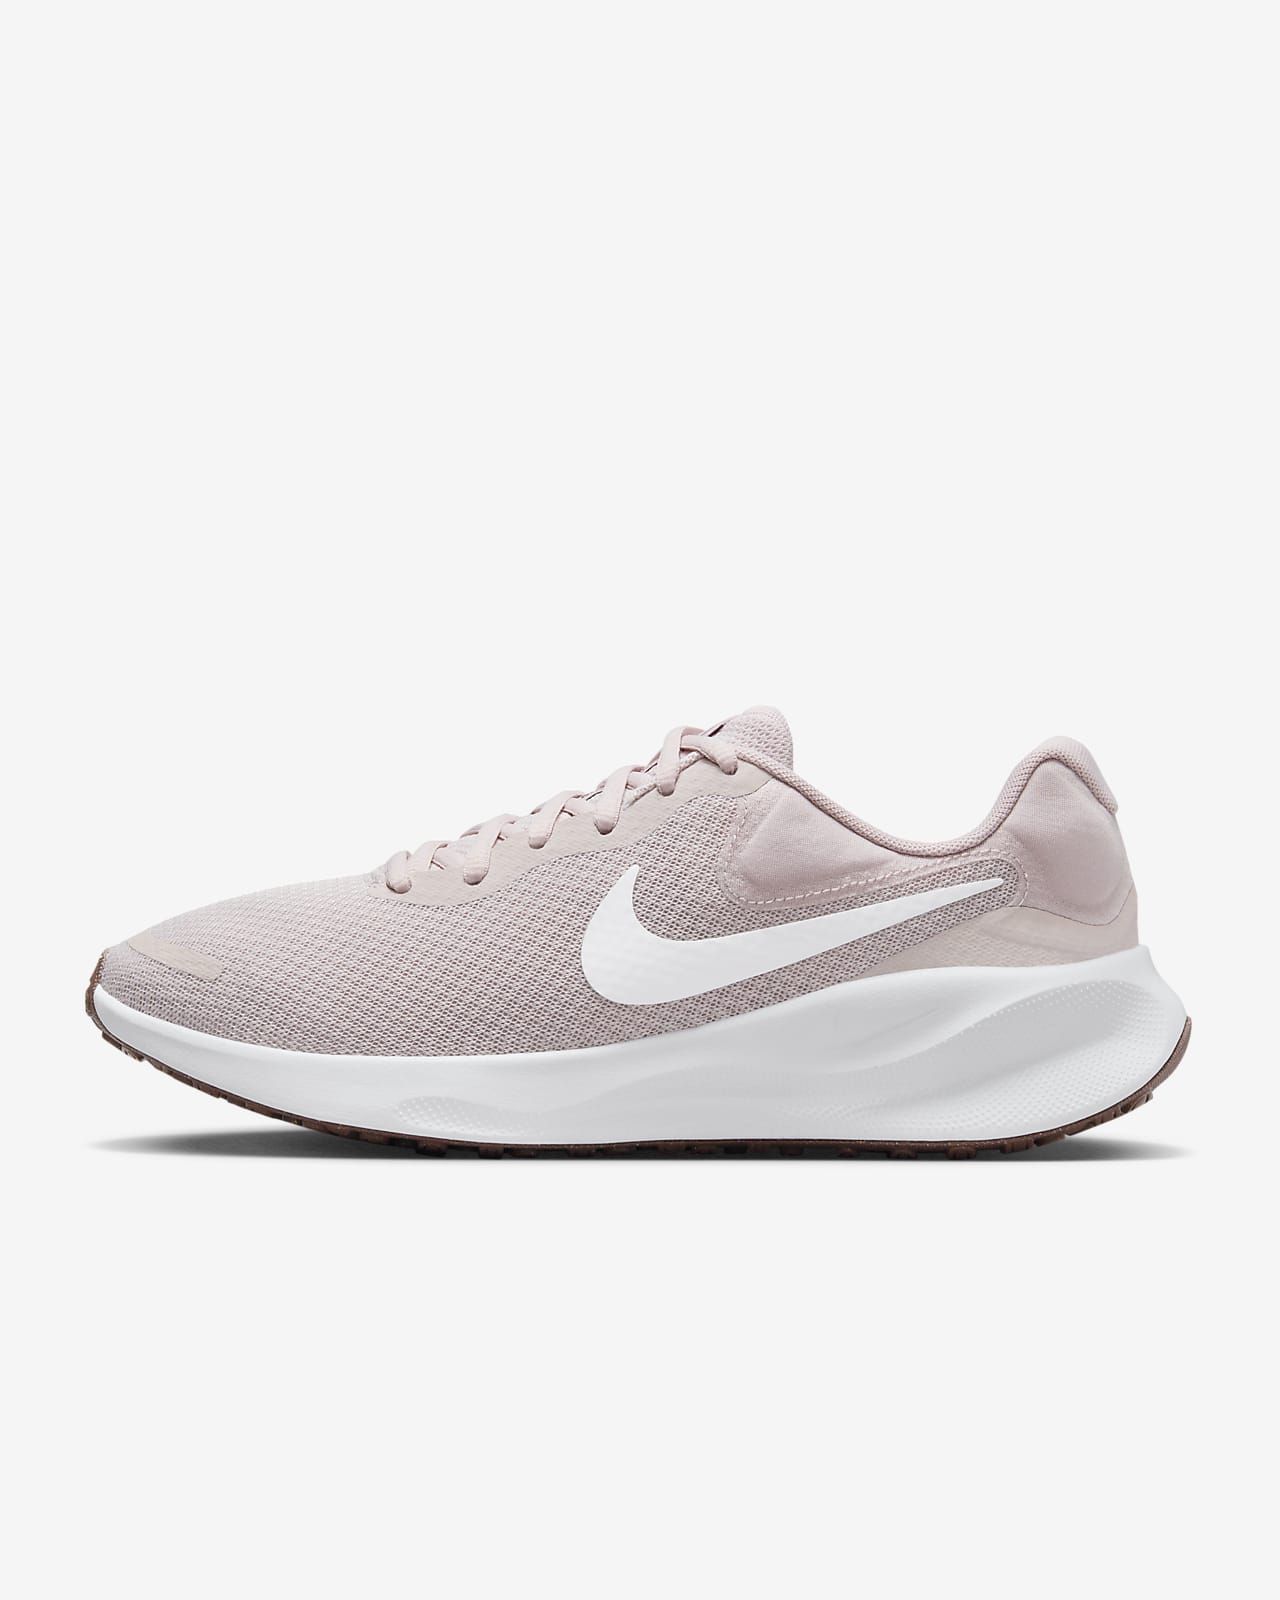 Nike Revolution 7 Women's Road Running Shoes (Extra Wide). Nike.com | Nike (US)